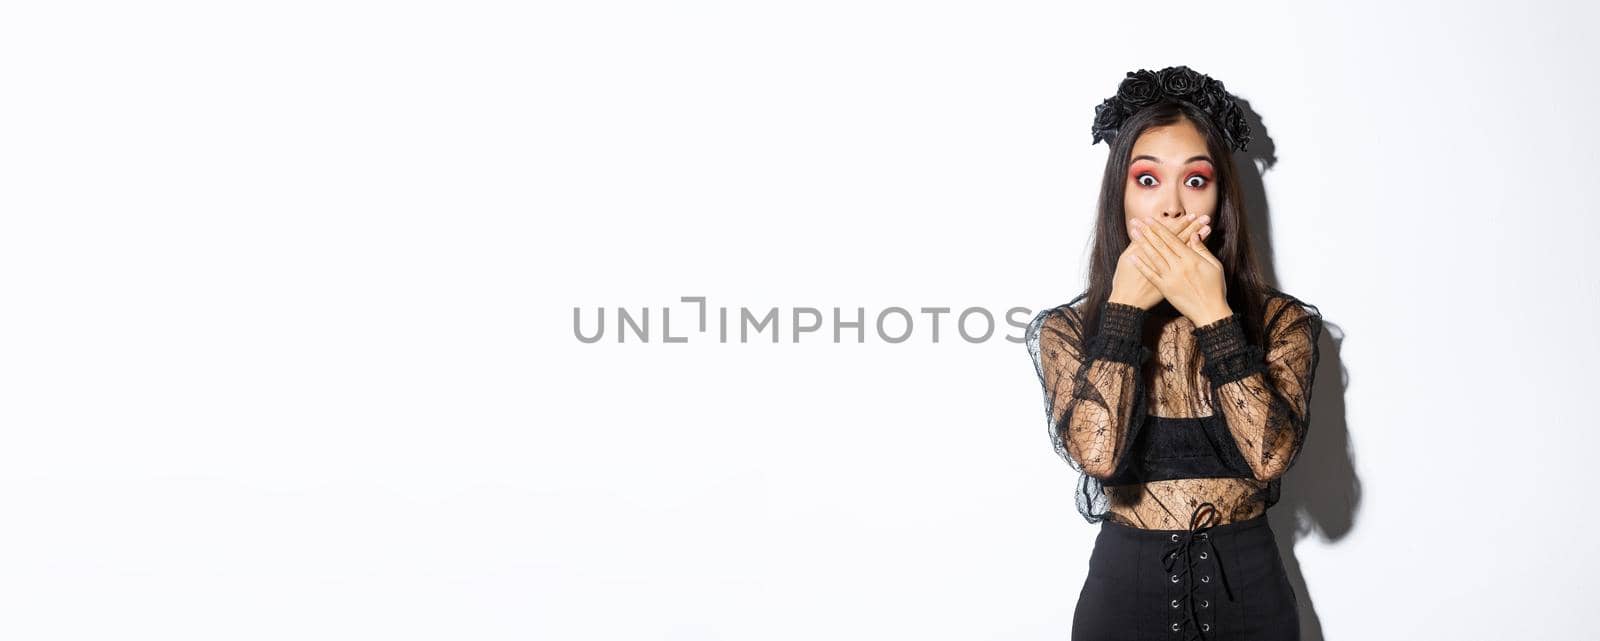 Shocked woman in witch outfit gasping and cover mouth speechless, standing over white background, looking at something surprising, wearing black lace dress and wreath, white background.